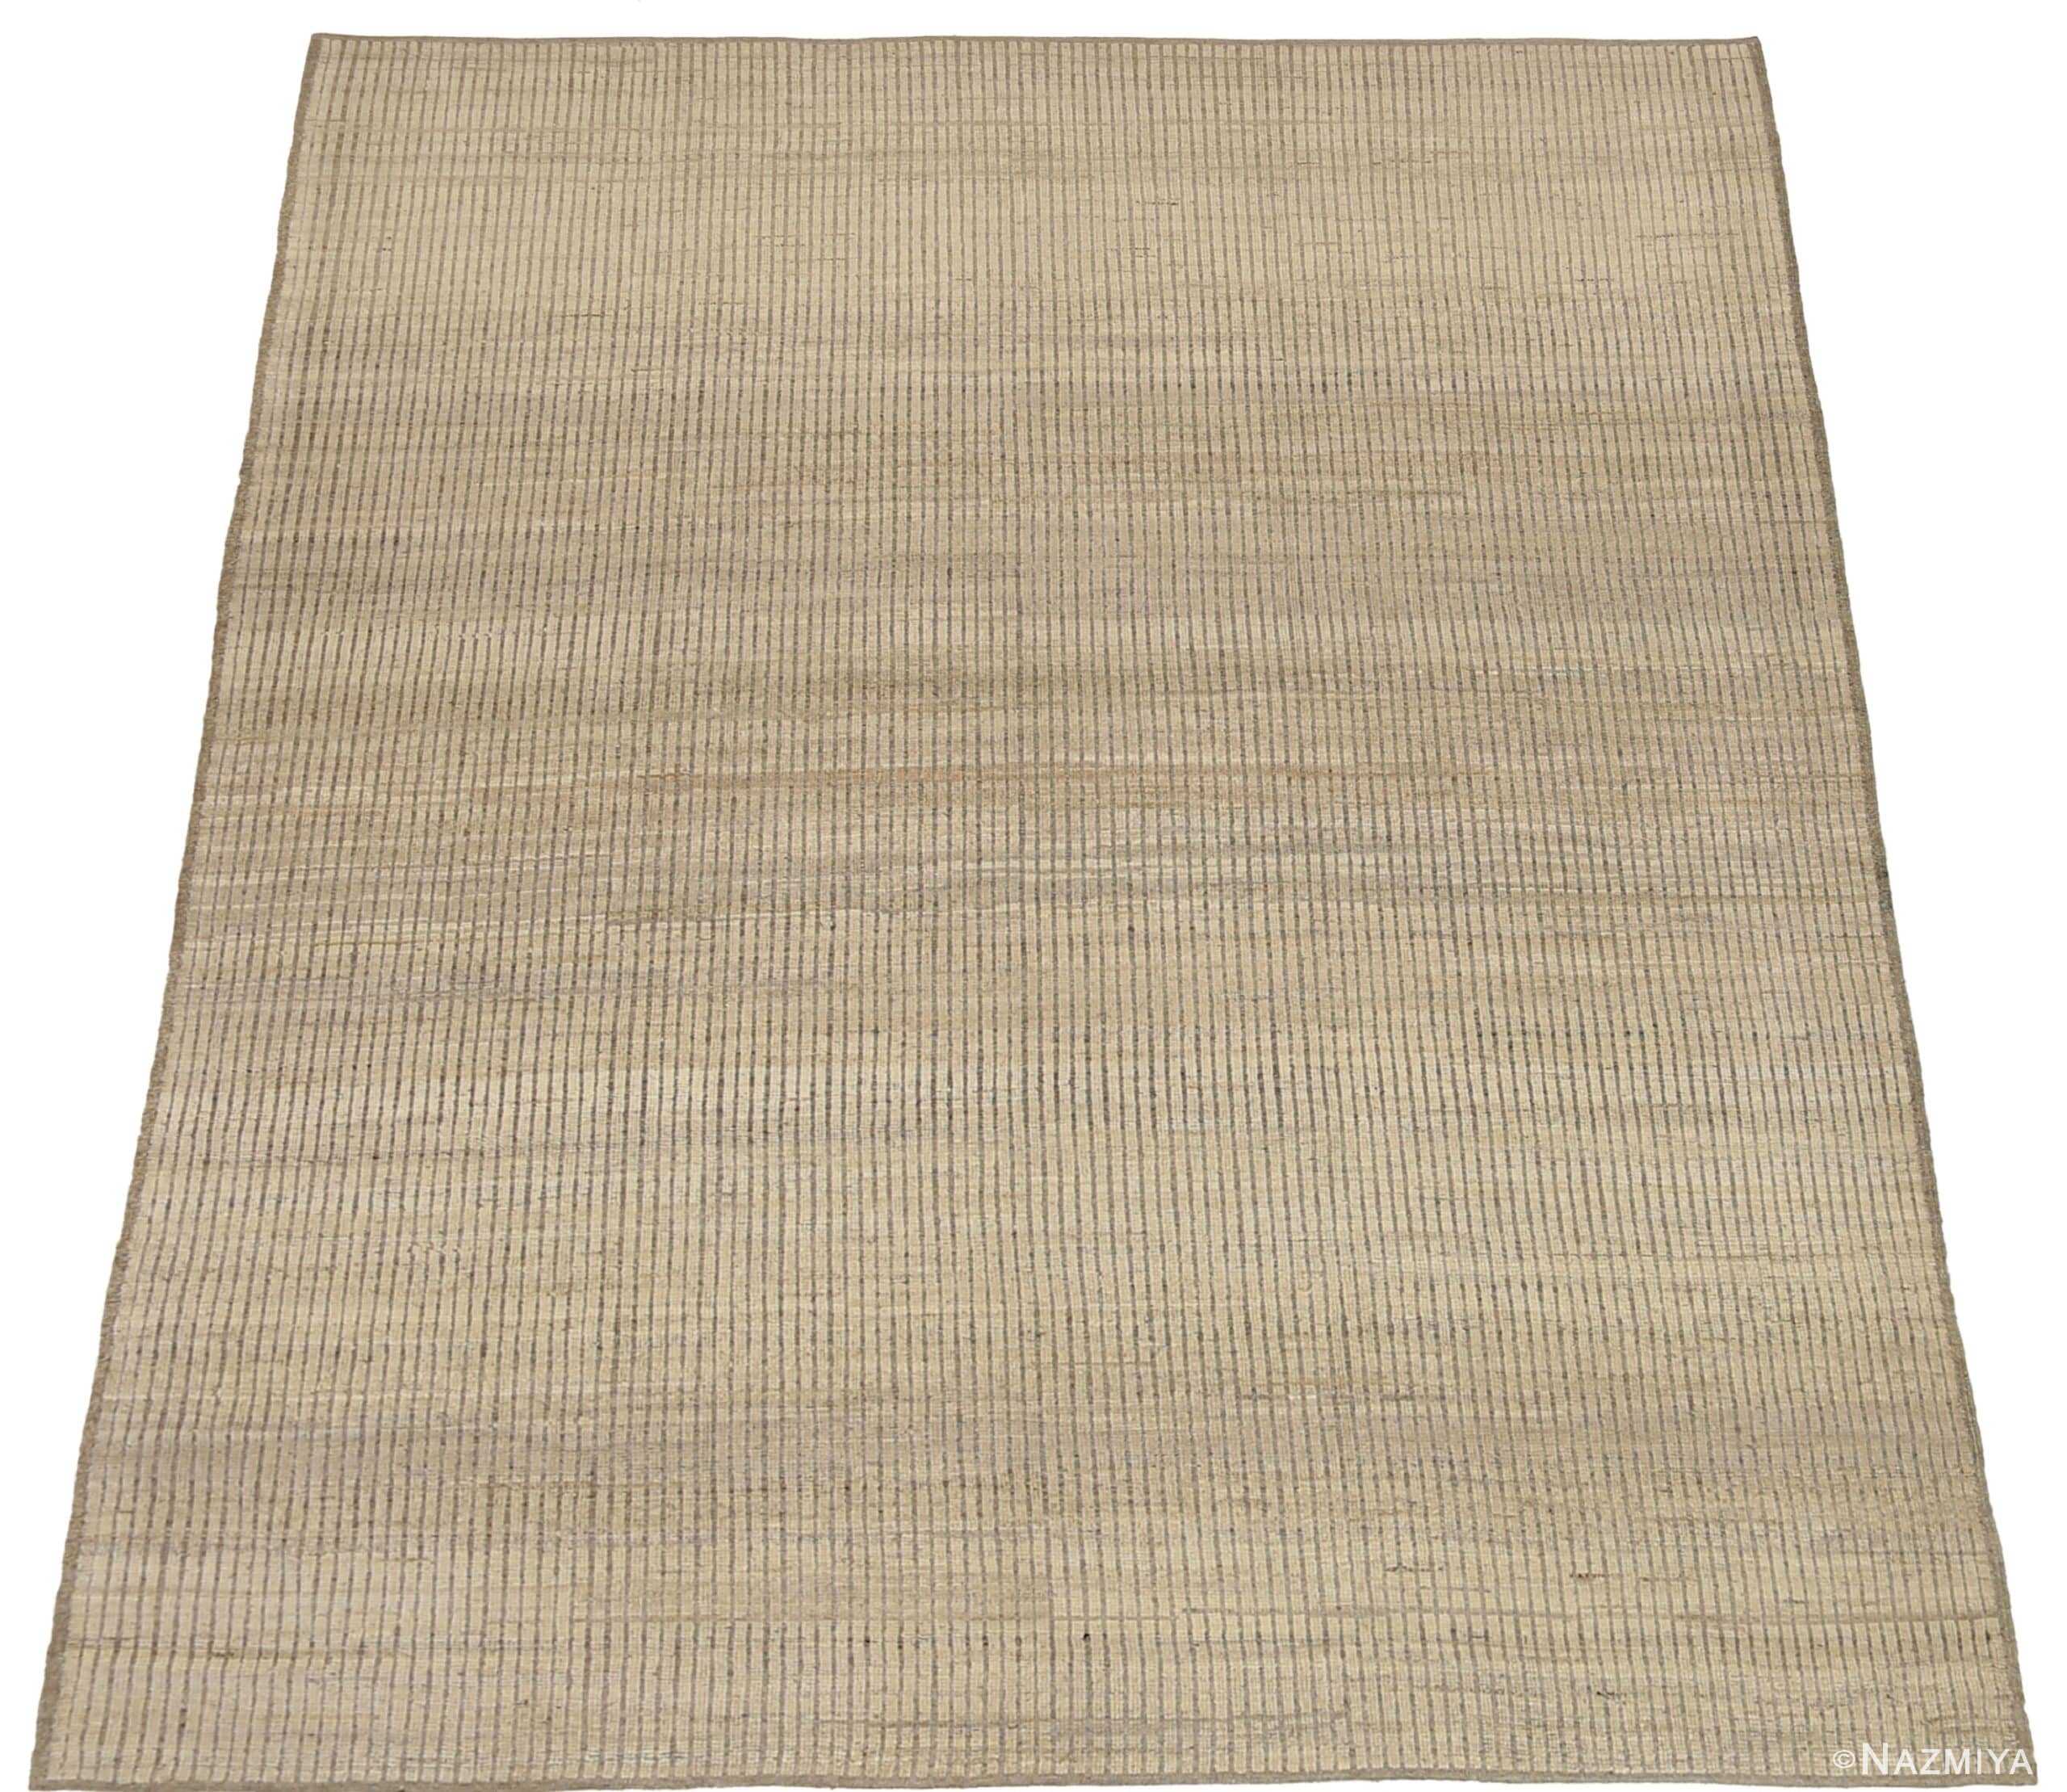 Whole View Of Artichoke Color Textured Modern Distressed Rug 60827 by Nazmiyal Antique Rugs